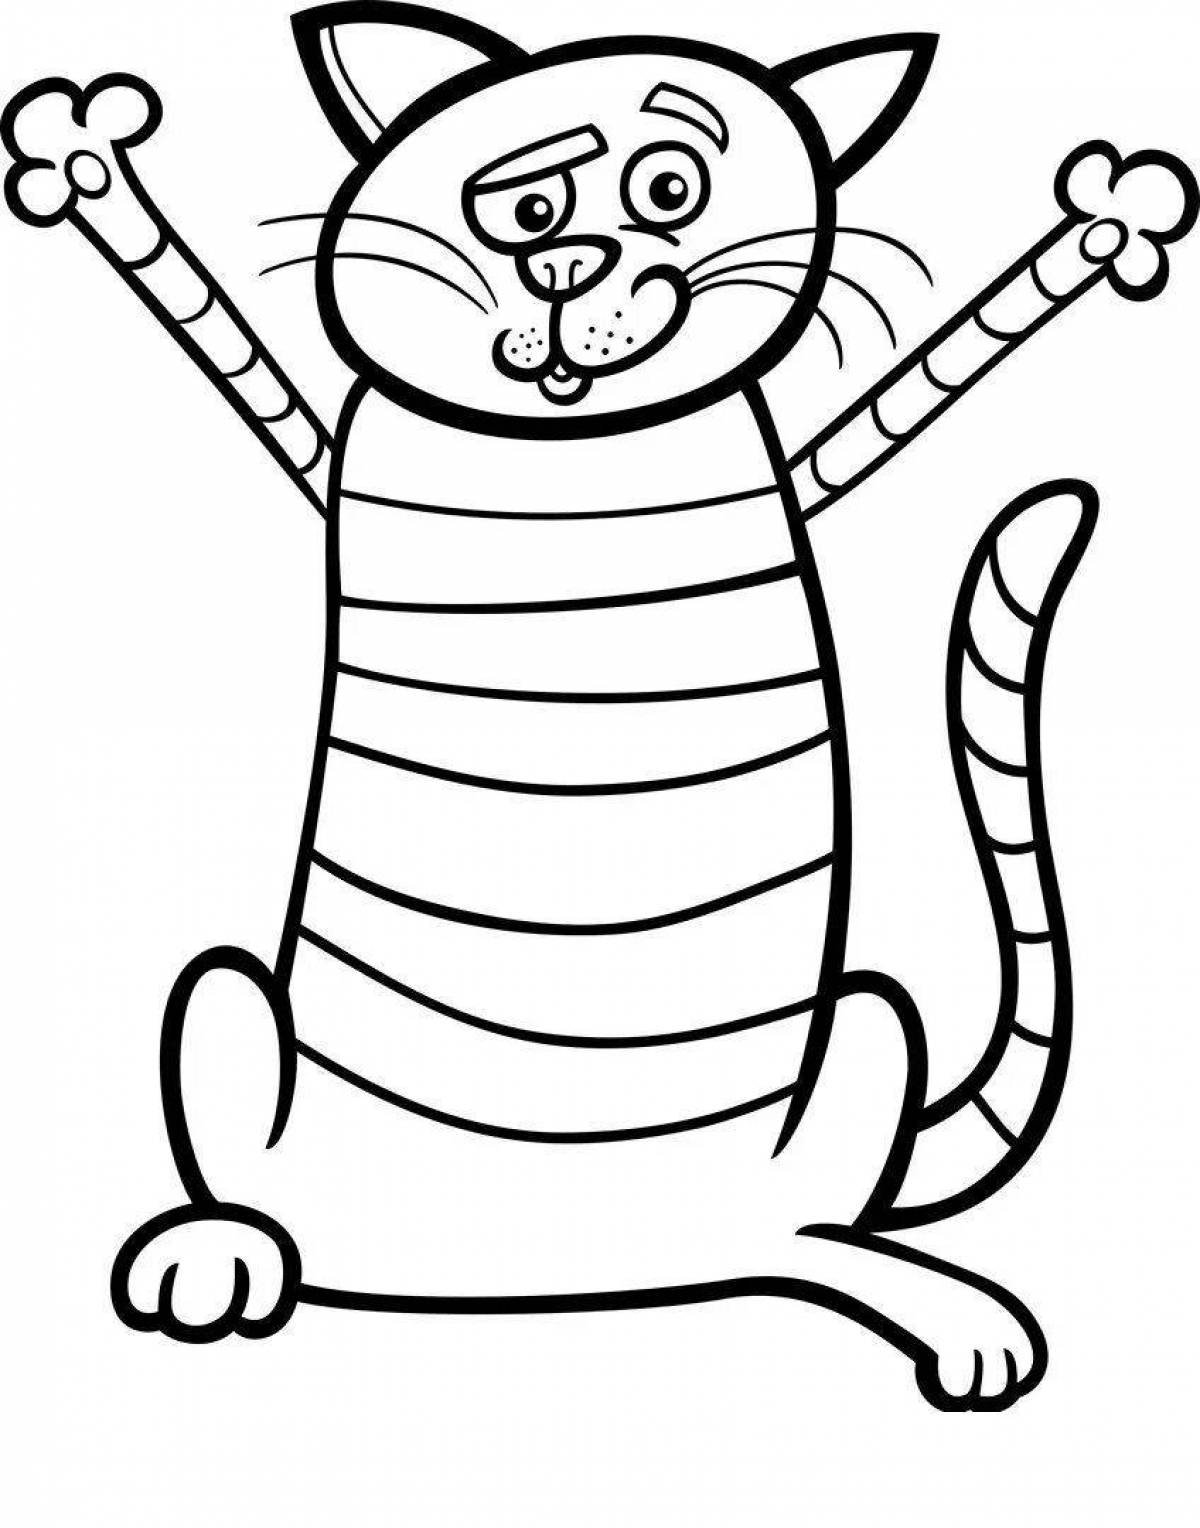 Coloring page cute tabby cat